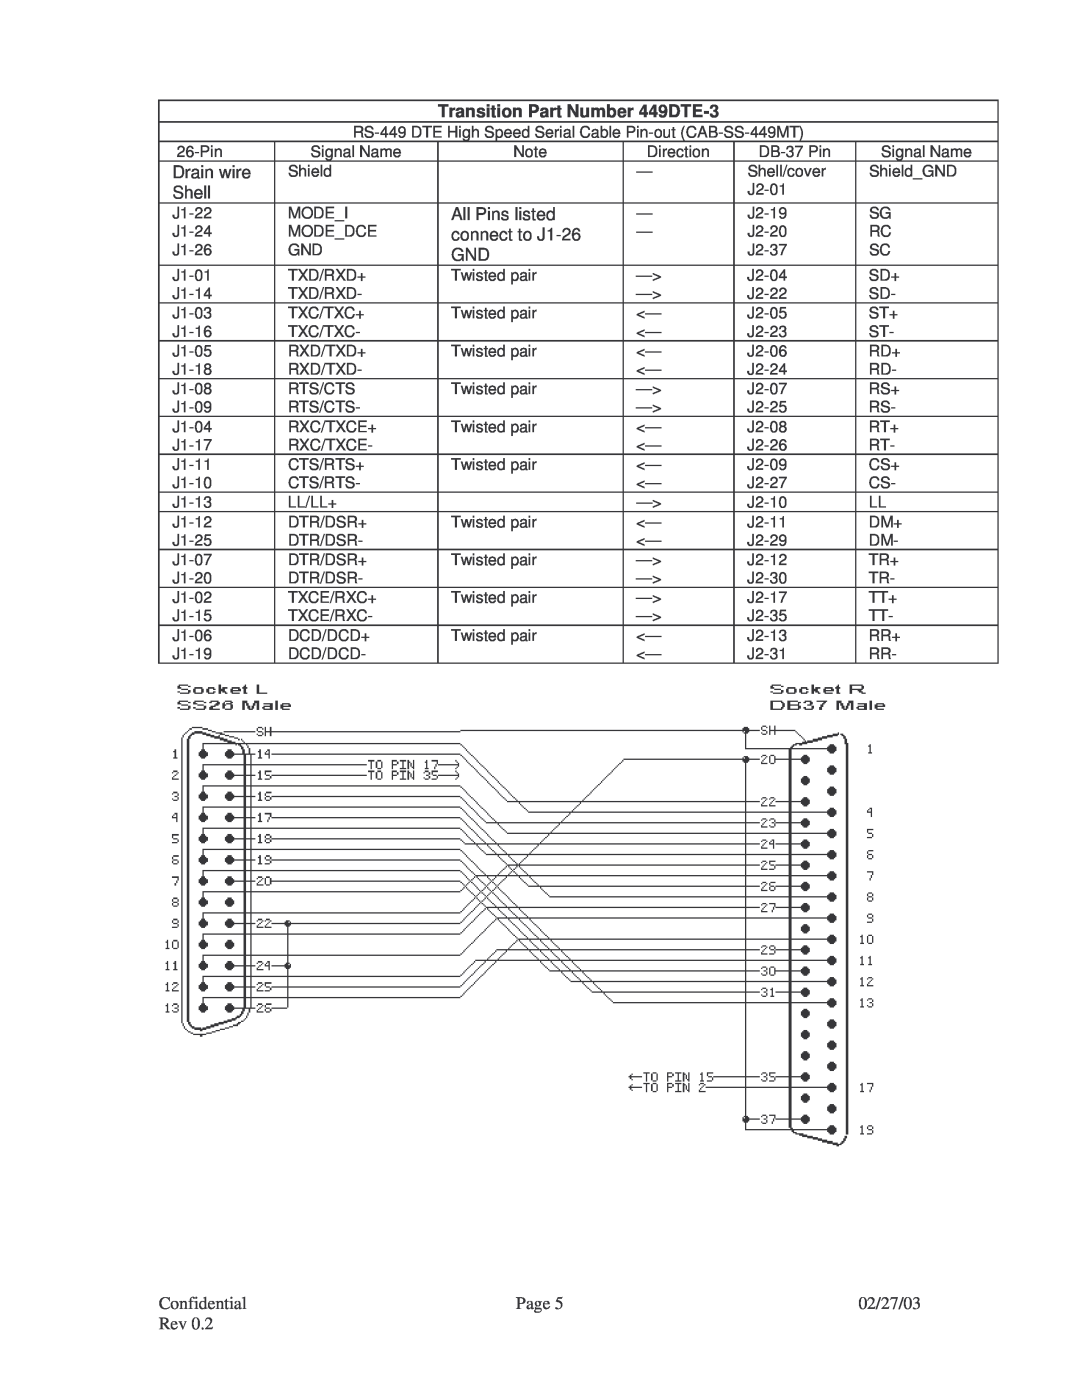 Transition Networks X.21, V.35, RS-449, RS-530, CPSVT26XX, RS-232 specifications Transition Part Number 449DTE-3 